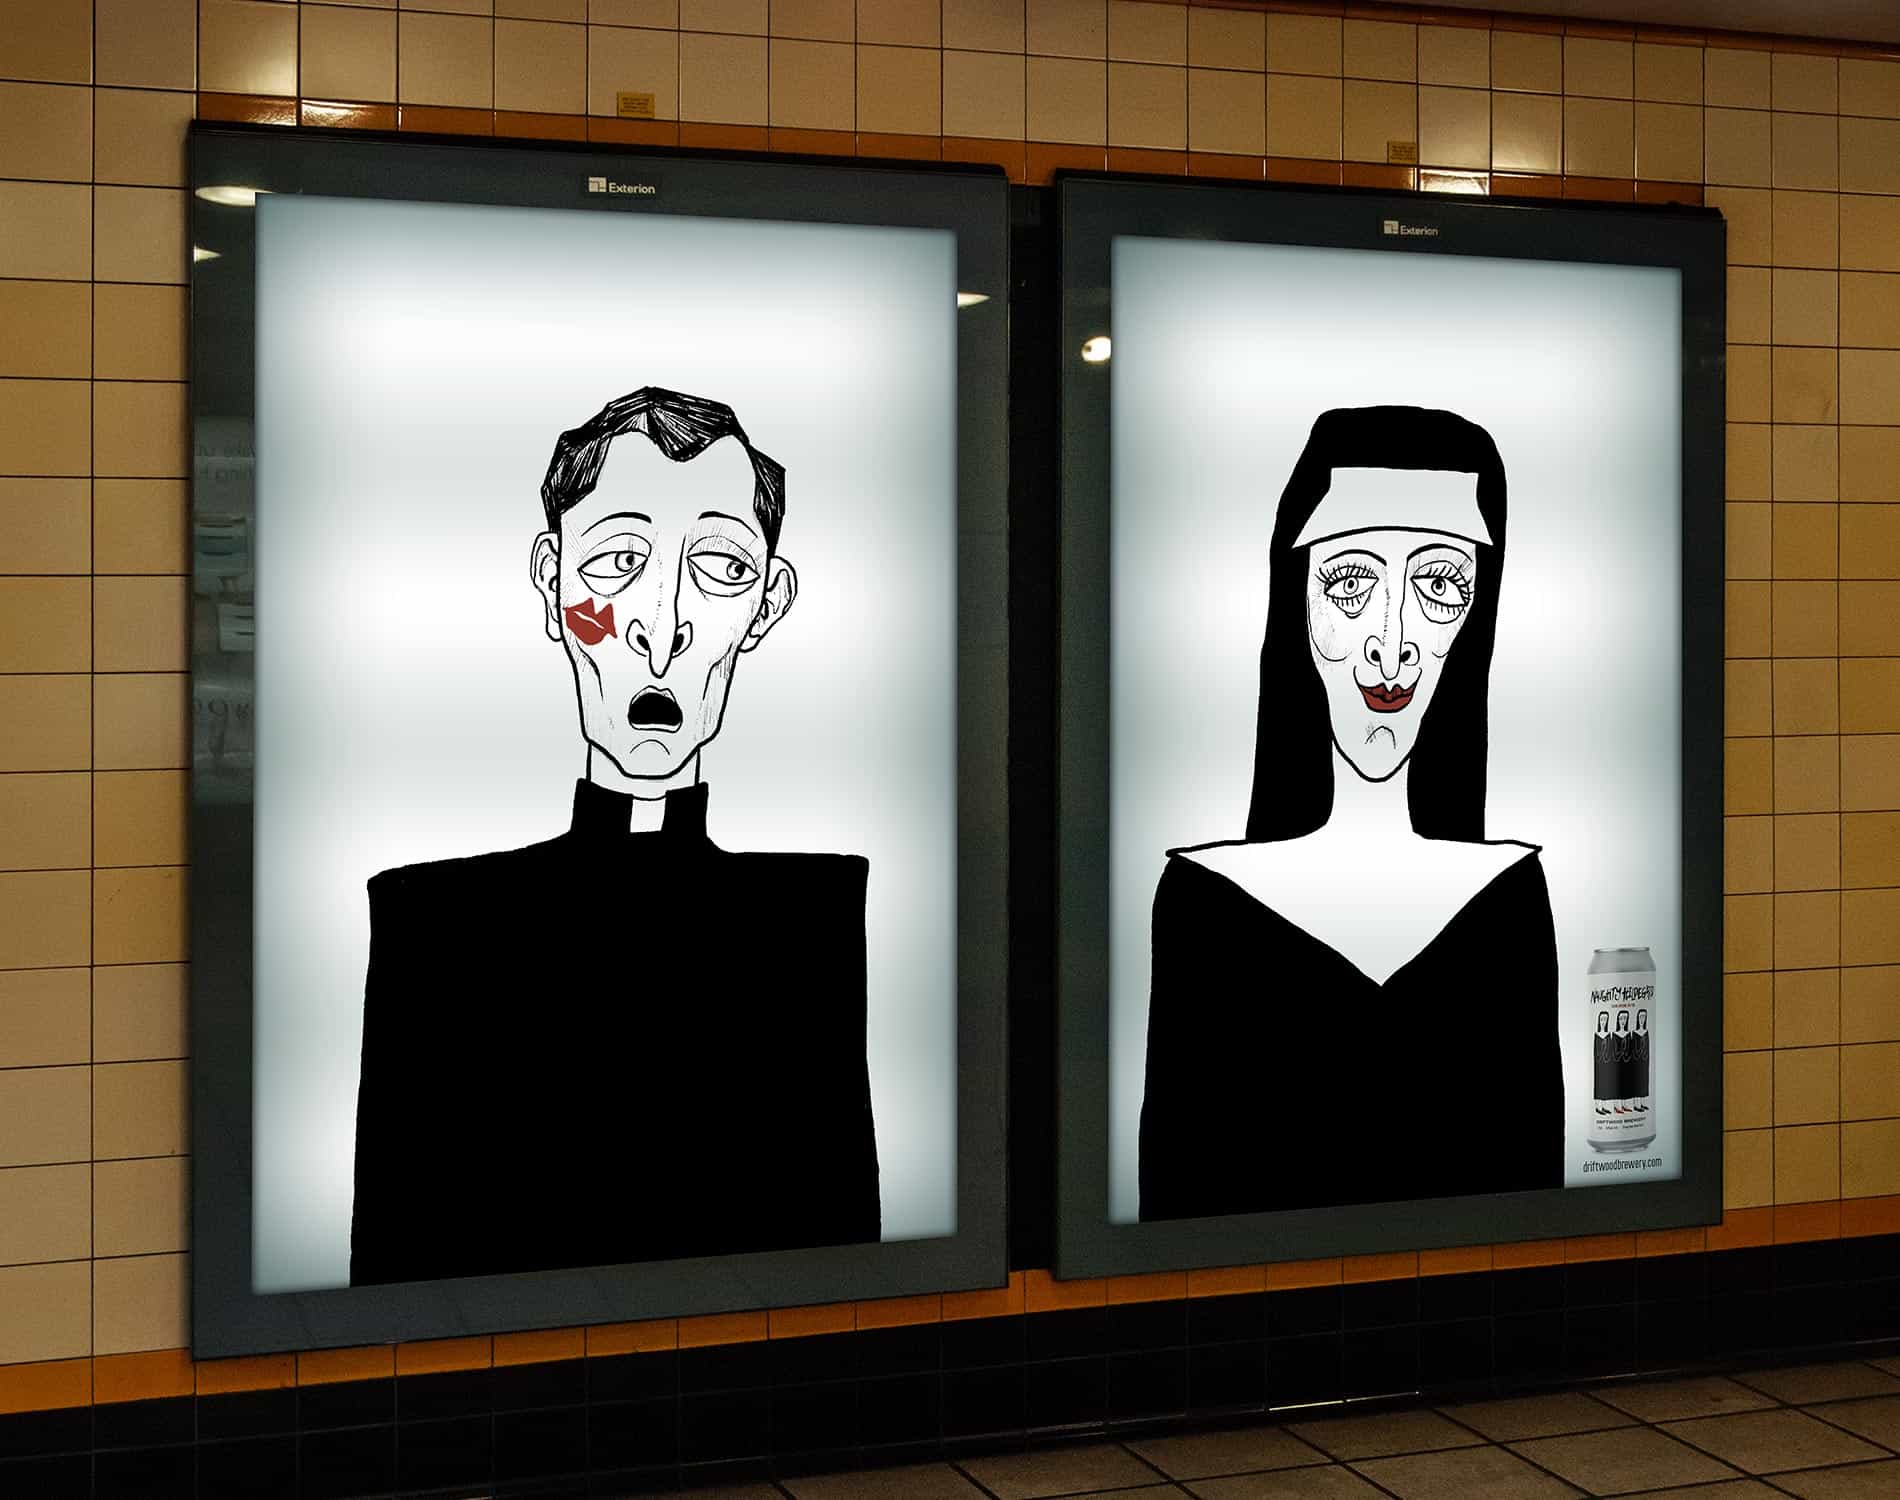 Naughty Hildegard beer promotion campaign illustrated posters in subway station of priest with red kiss mark on his cheek and nun with red lipstick